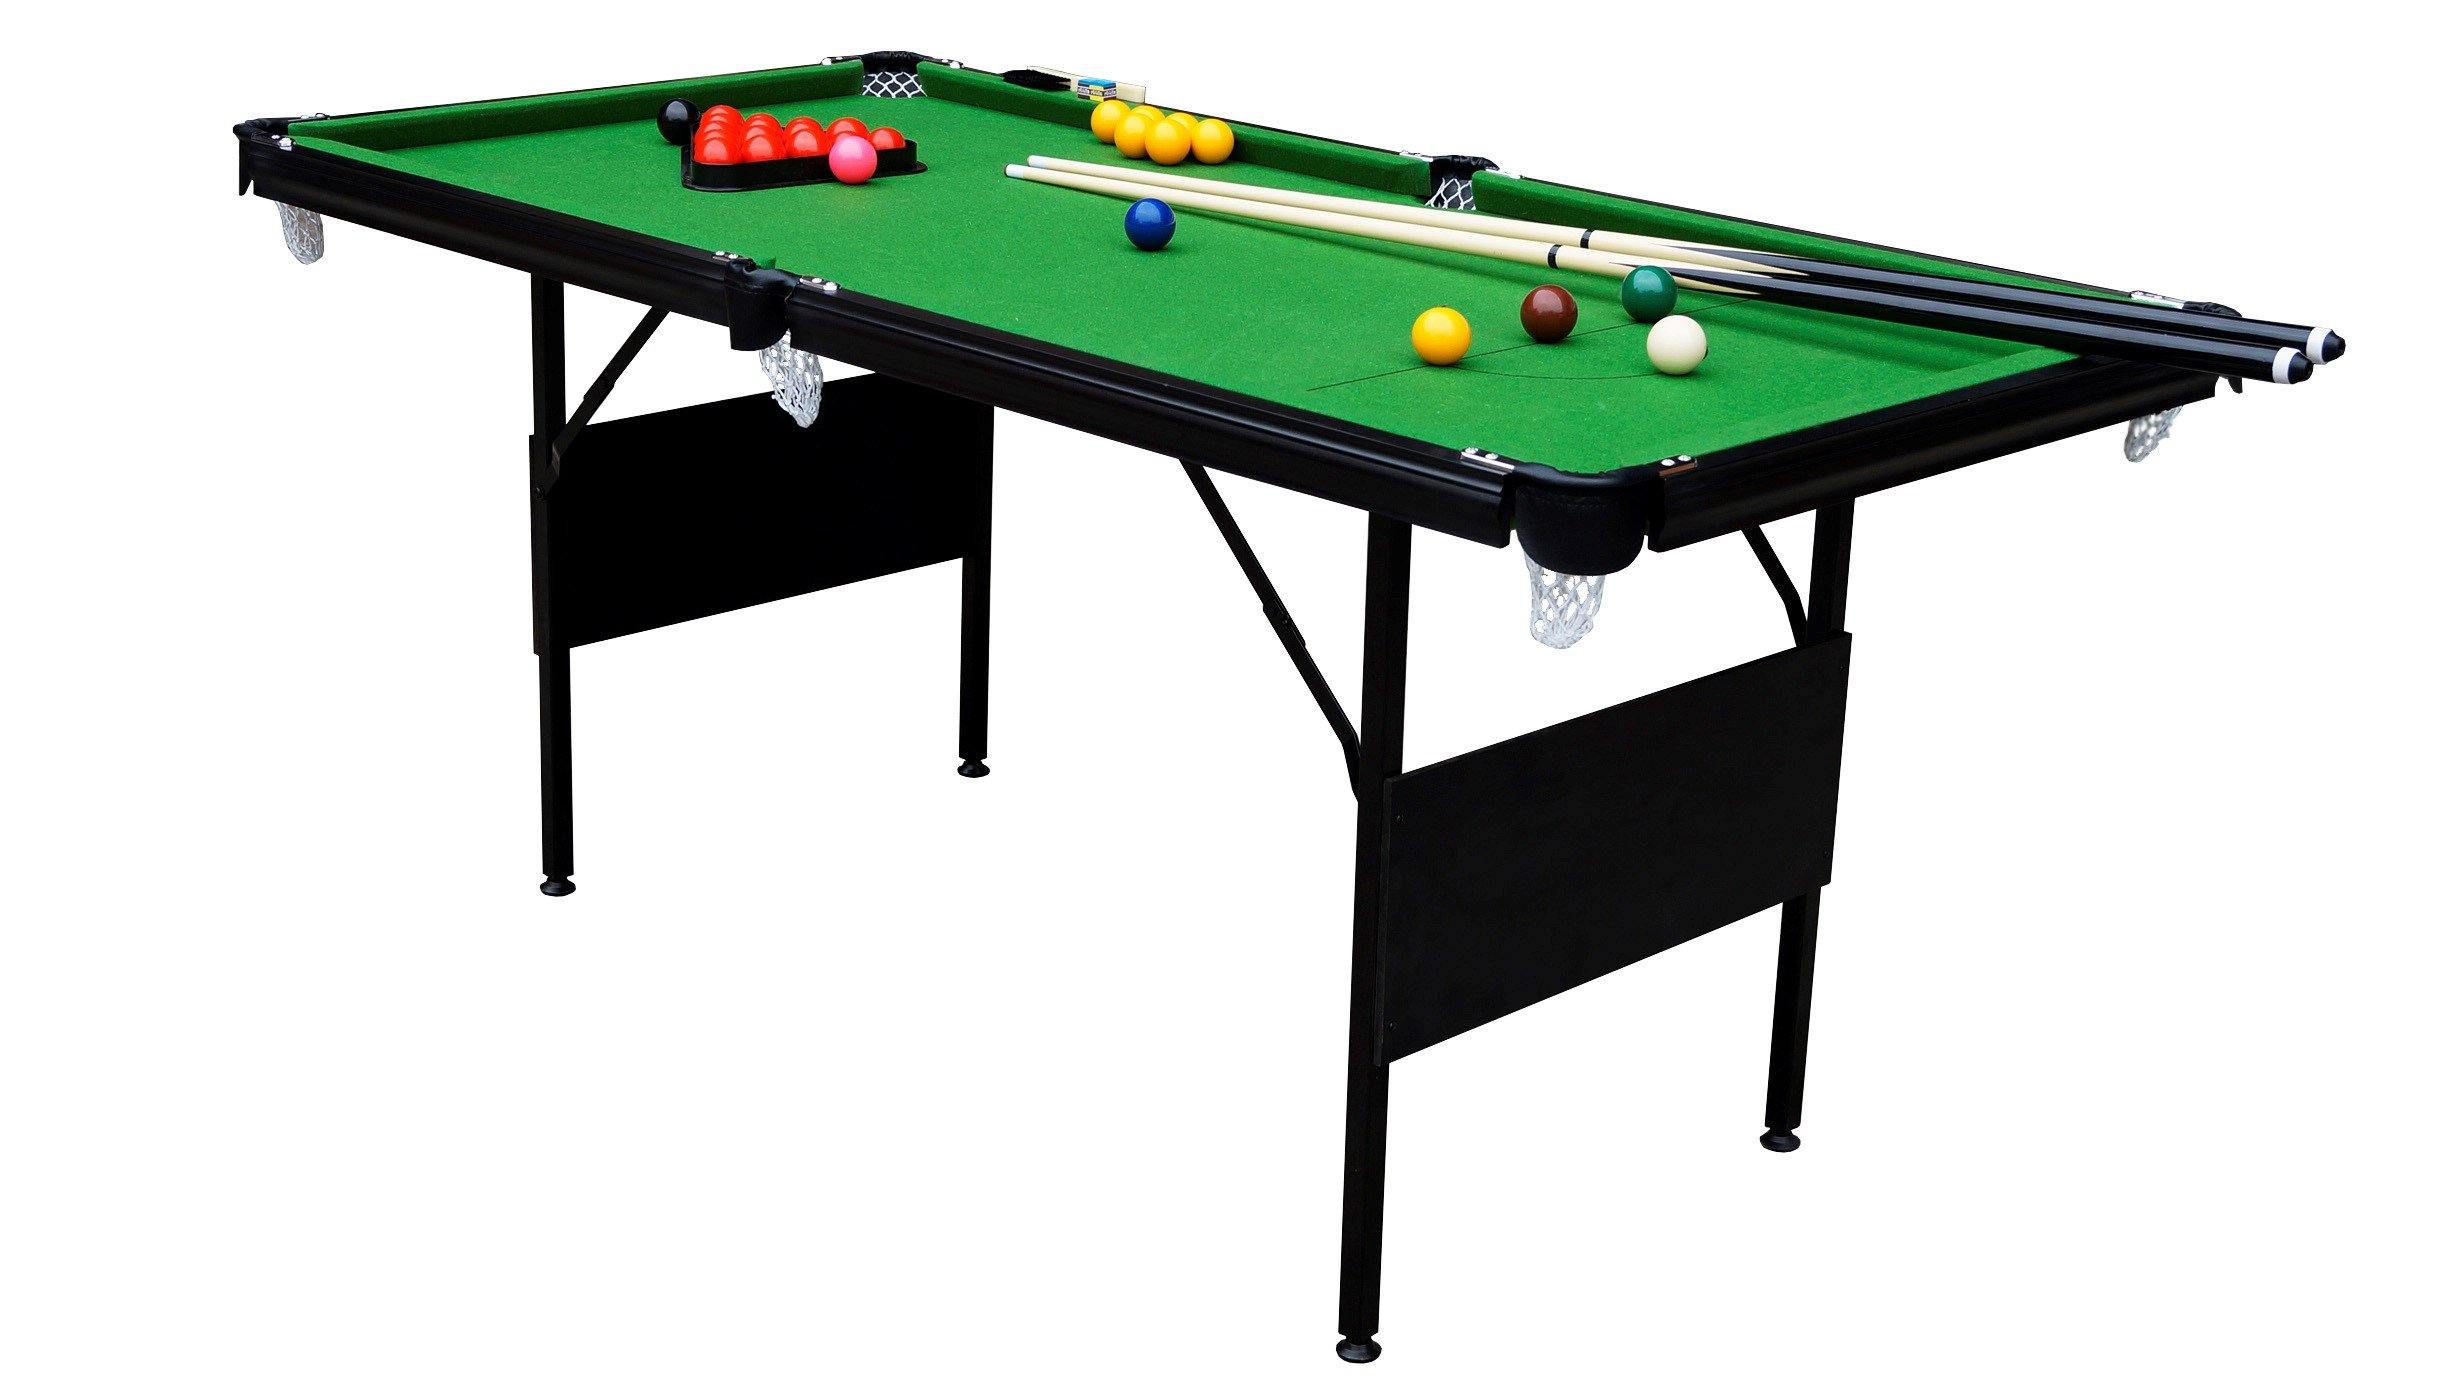 Gamesson Crucible 6ft Snooker Table